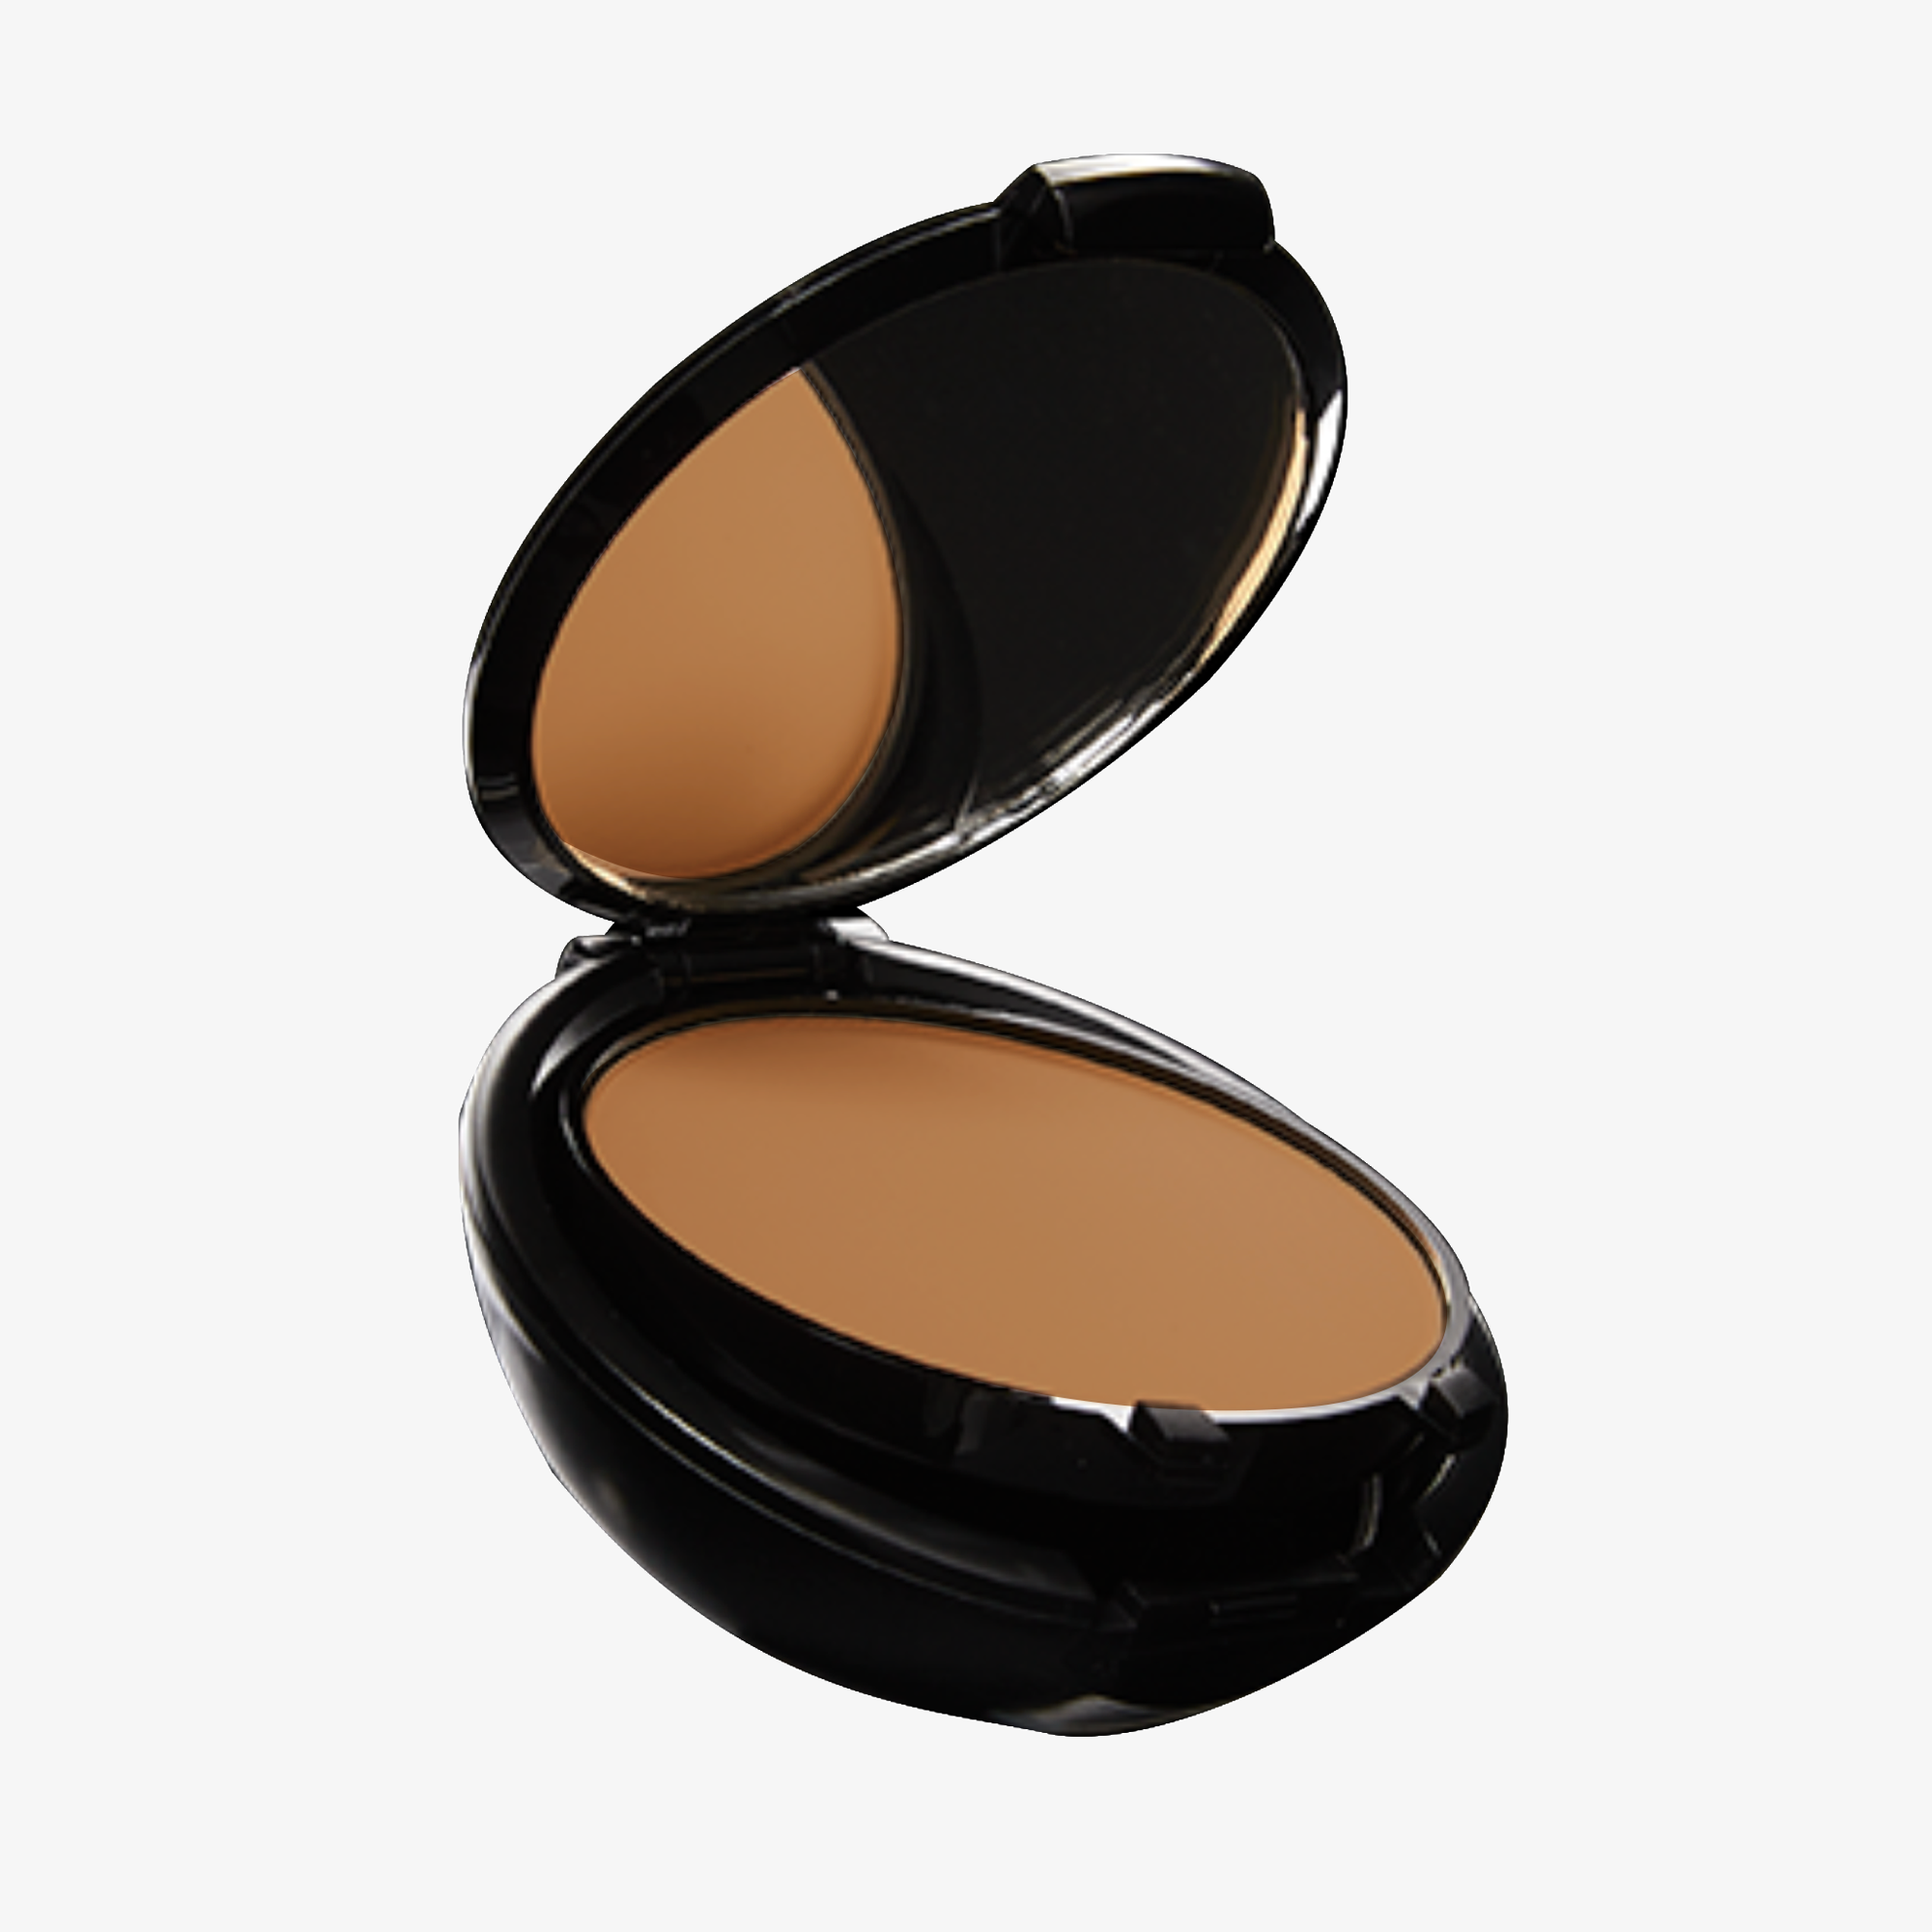 Full coverage foundation and powder all-in-one.  FREE OF Cruelty-Free, Hypoallergenic, Non-Comedogenic, Halal Certified, and EU Compliant. Free of Parabens and Fragrances. 